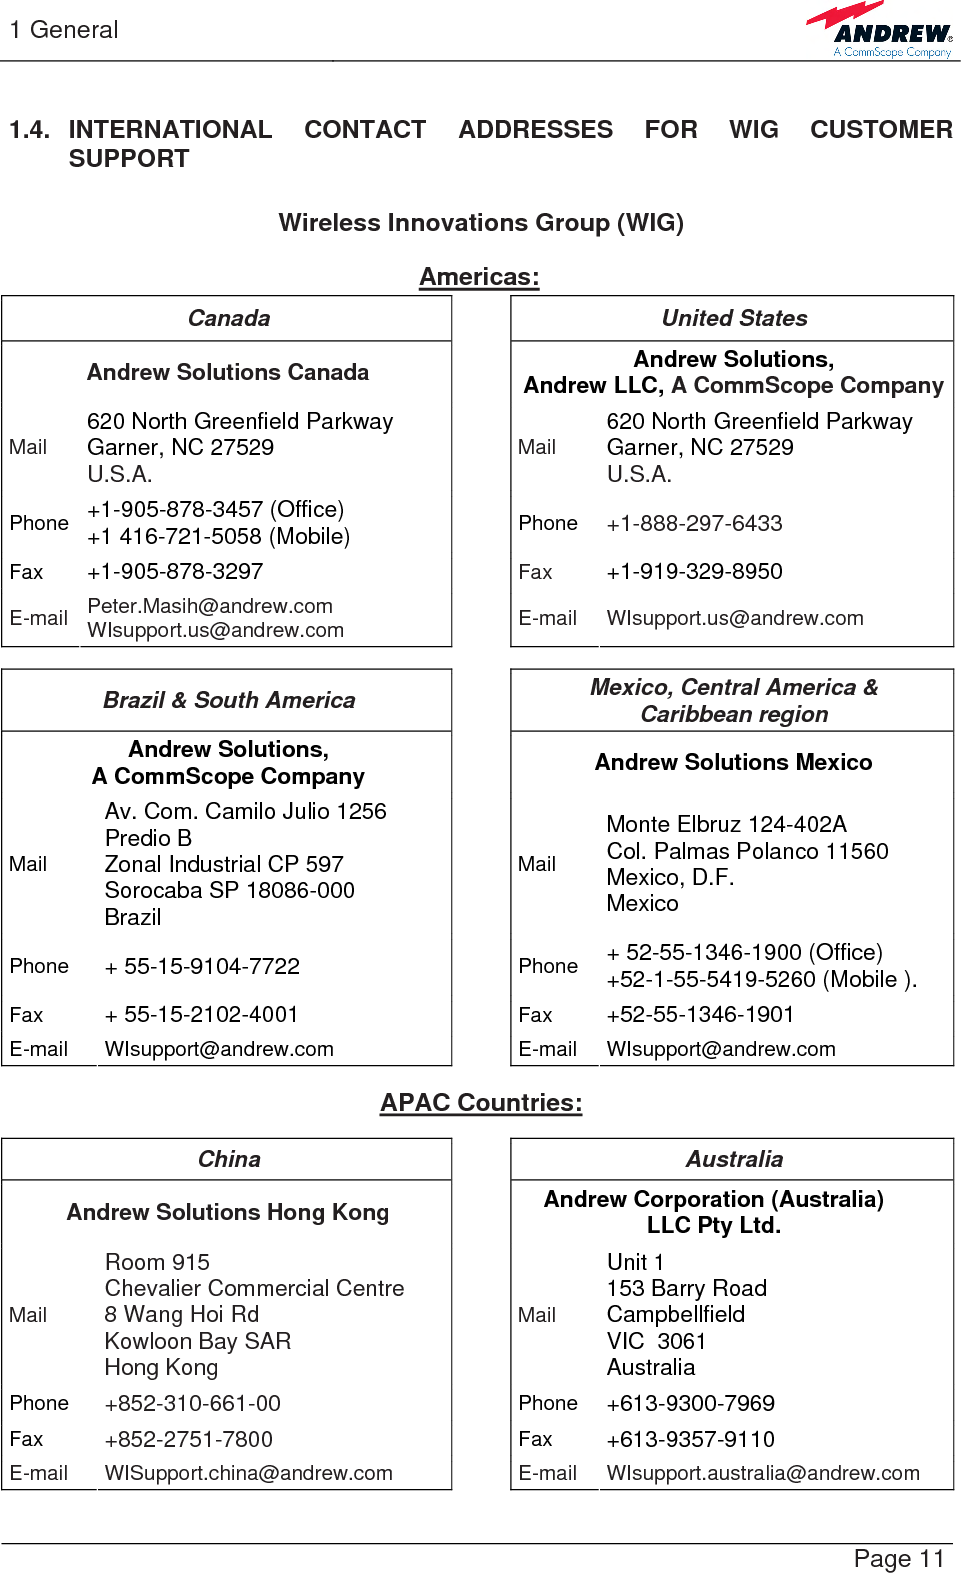 1 General   Page 11 1.4. INTERNATIONAL  CONTACT ADDRESSES FOR WIG CUSTOMER SUPPORT  Wireless Innovations Group (WIG)  Americas: Canada United States Andrew Solutions Canada  Andrew Solutions,  Andrew LLC, A CommScope CompanyMail 620 North Greenfield Parkway Garner, NC 27529 U.S.A. Mail  620 North Greenfield Parkway Garner, NC 27529 U.S.A. Phone +1-905-878-3457 (Office) +1 416-721-5058 (Mobile) Phone +1-888-297-6433 Fax +1-905-878-3297  Fax  +1-919-329-8950 E-mail Peter.Masih@andrew.com WIsupport.us@andrew.com  E-mail WIsupport.us@andrew.com  Brazil &amp; South America  Mexico, Central America &amp;  Caribbean region Andrew Solutions,  A CommScope Company  Andrew Solutions Mexico Mail Av. Com. Camilo Julio 1256 Predio B Zonal Industrial CP 597 Sorocaba SP 18086-000 Brazil Mail Monte Elbruz 124-402A Col. Palmas Polanco 11560 Mexico, D.F. Mexico Phone  + 55-15-9104-7722  Phone  + 52-55-1346-1900 (Office) +52-1-55-5419-5260 (Mobile ). Fax  + 55-15-2102-4001  Fax  +52-55-1346-1901 E-mail WIsupport@andrew.com  E-mail WIsupport@andrew.com  APAC Countries:  China Australia Andrew Solutions Hong Kong  Andrew Corporation (Australia) LLC Pty Ltd. Mail Room 915  Chevalier Commercial Centre 8 Wang Hoi Rd Kowloon Bay SAR Hong Kong Mail Unit 1 153 Barry Road Campbellfield  VIC  3061 Australia Phone +852-310-661-00  Phone +613-9300-7969 Fax +852-2751-7800  Fax +613-9357-9110 E-mail WISupport.china@andrew.com  E-mail WIsupport.australia@andrew.com 